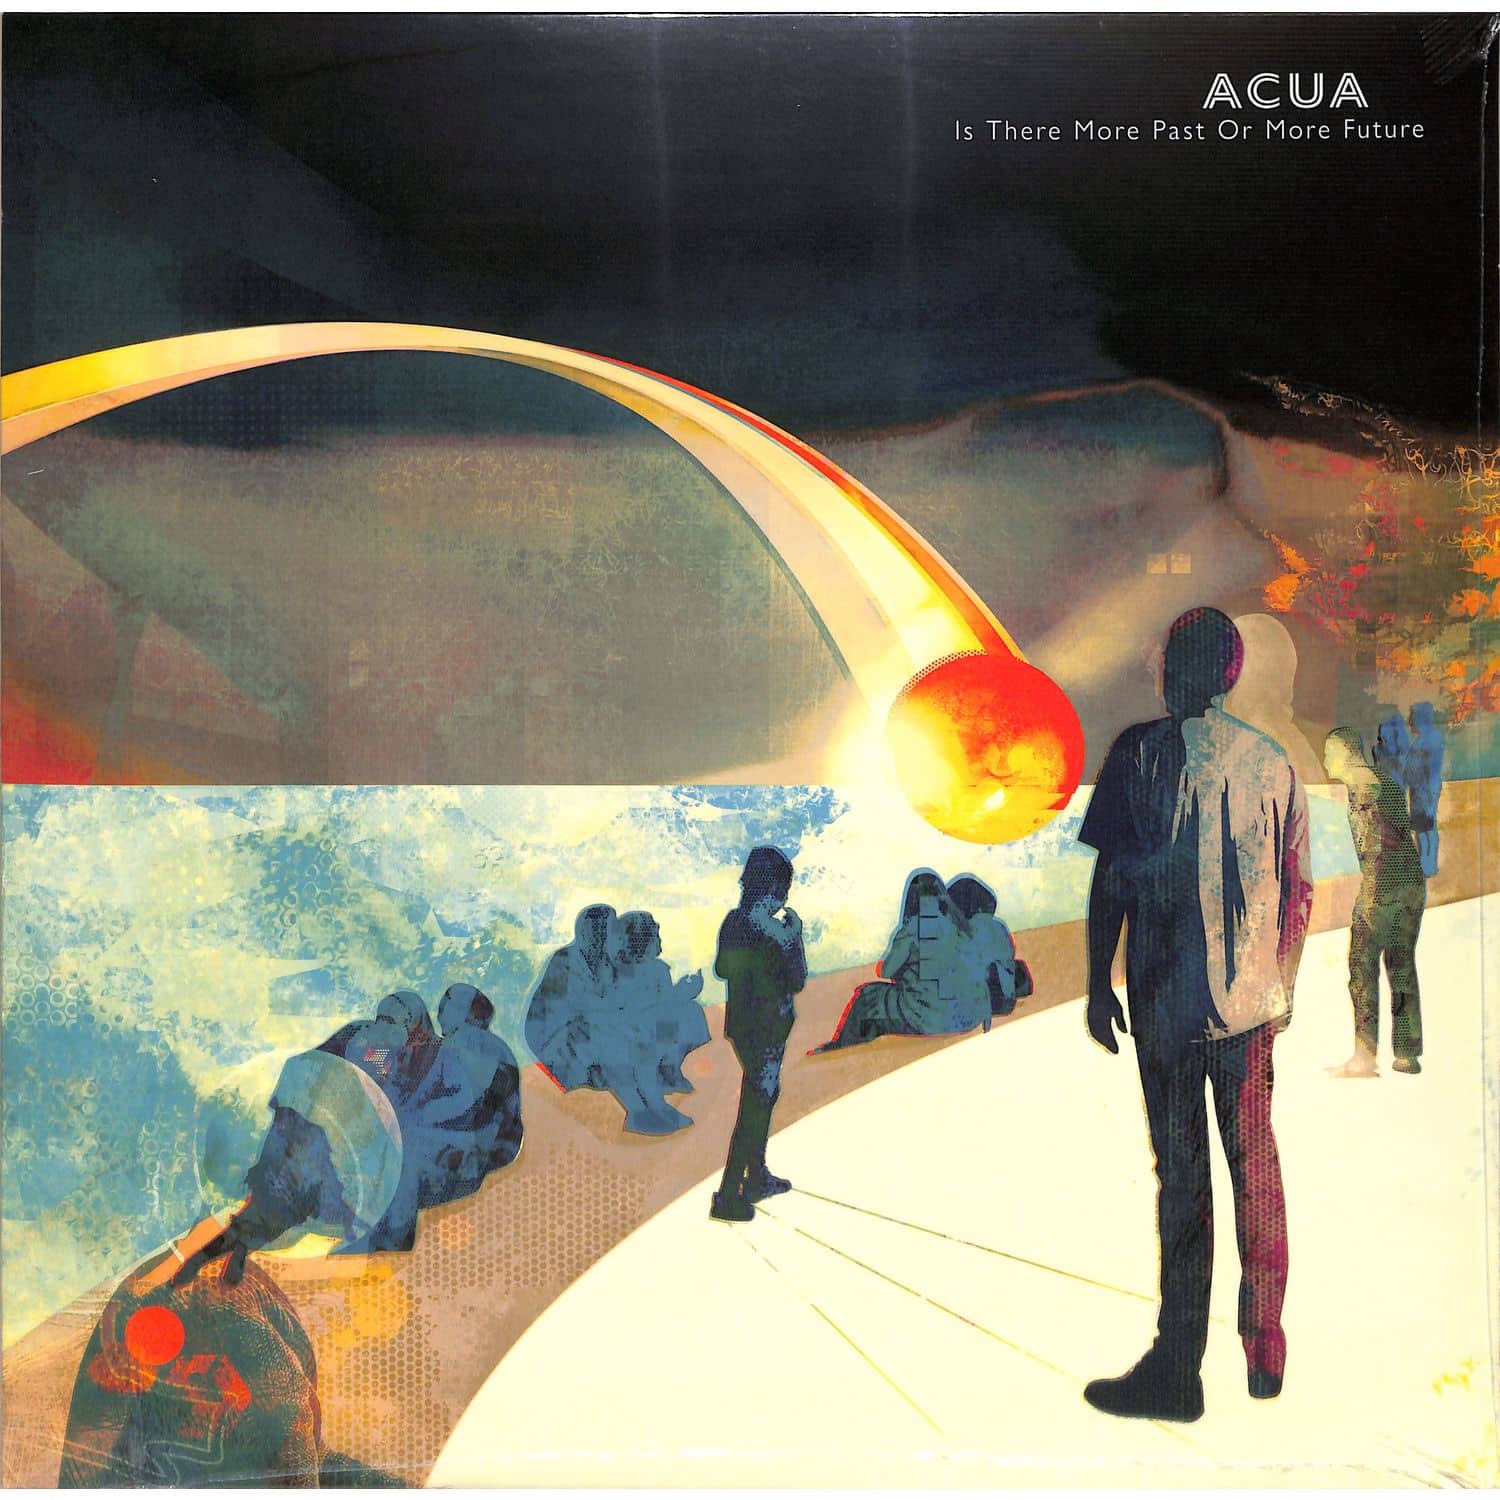 Acua - IS THERE MORE PAST OR MORE FUTURE 